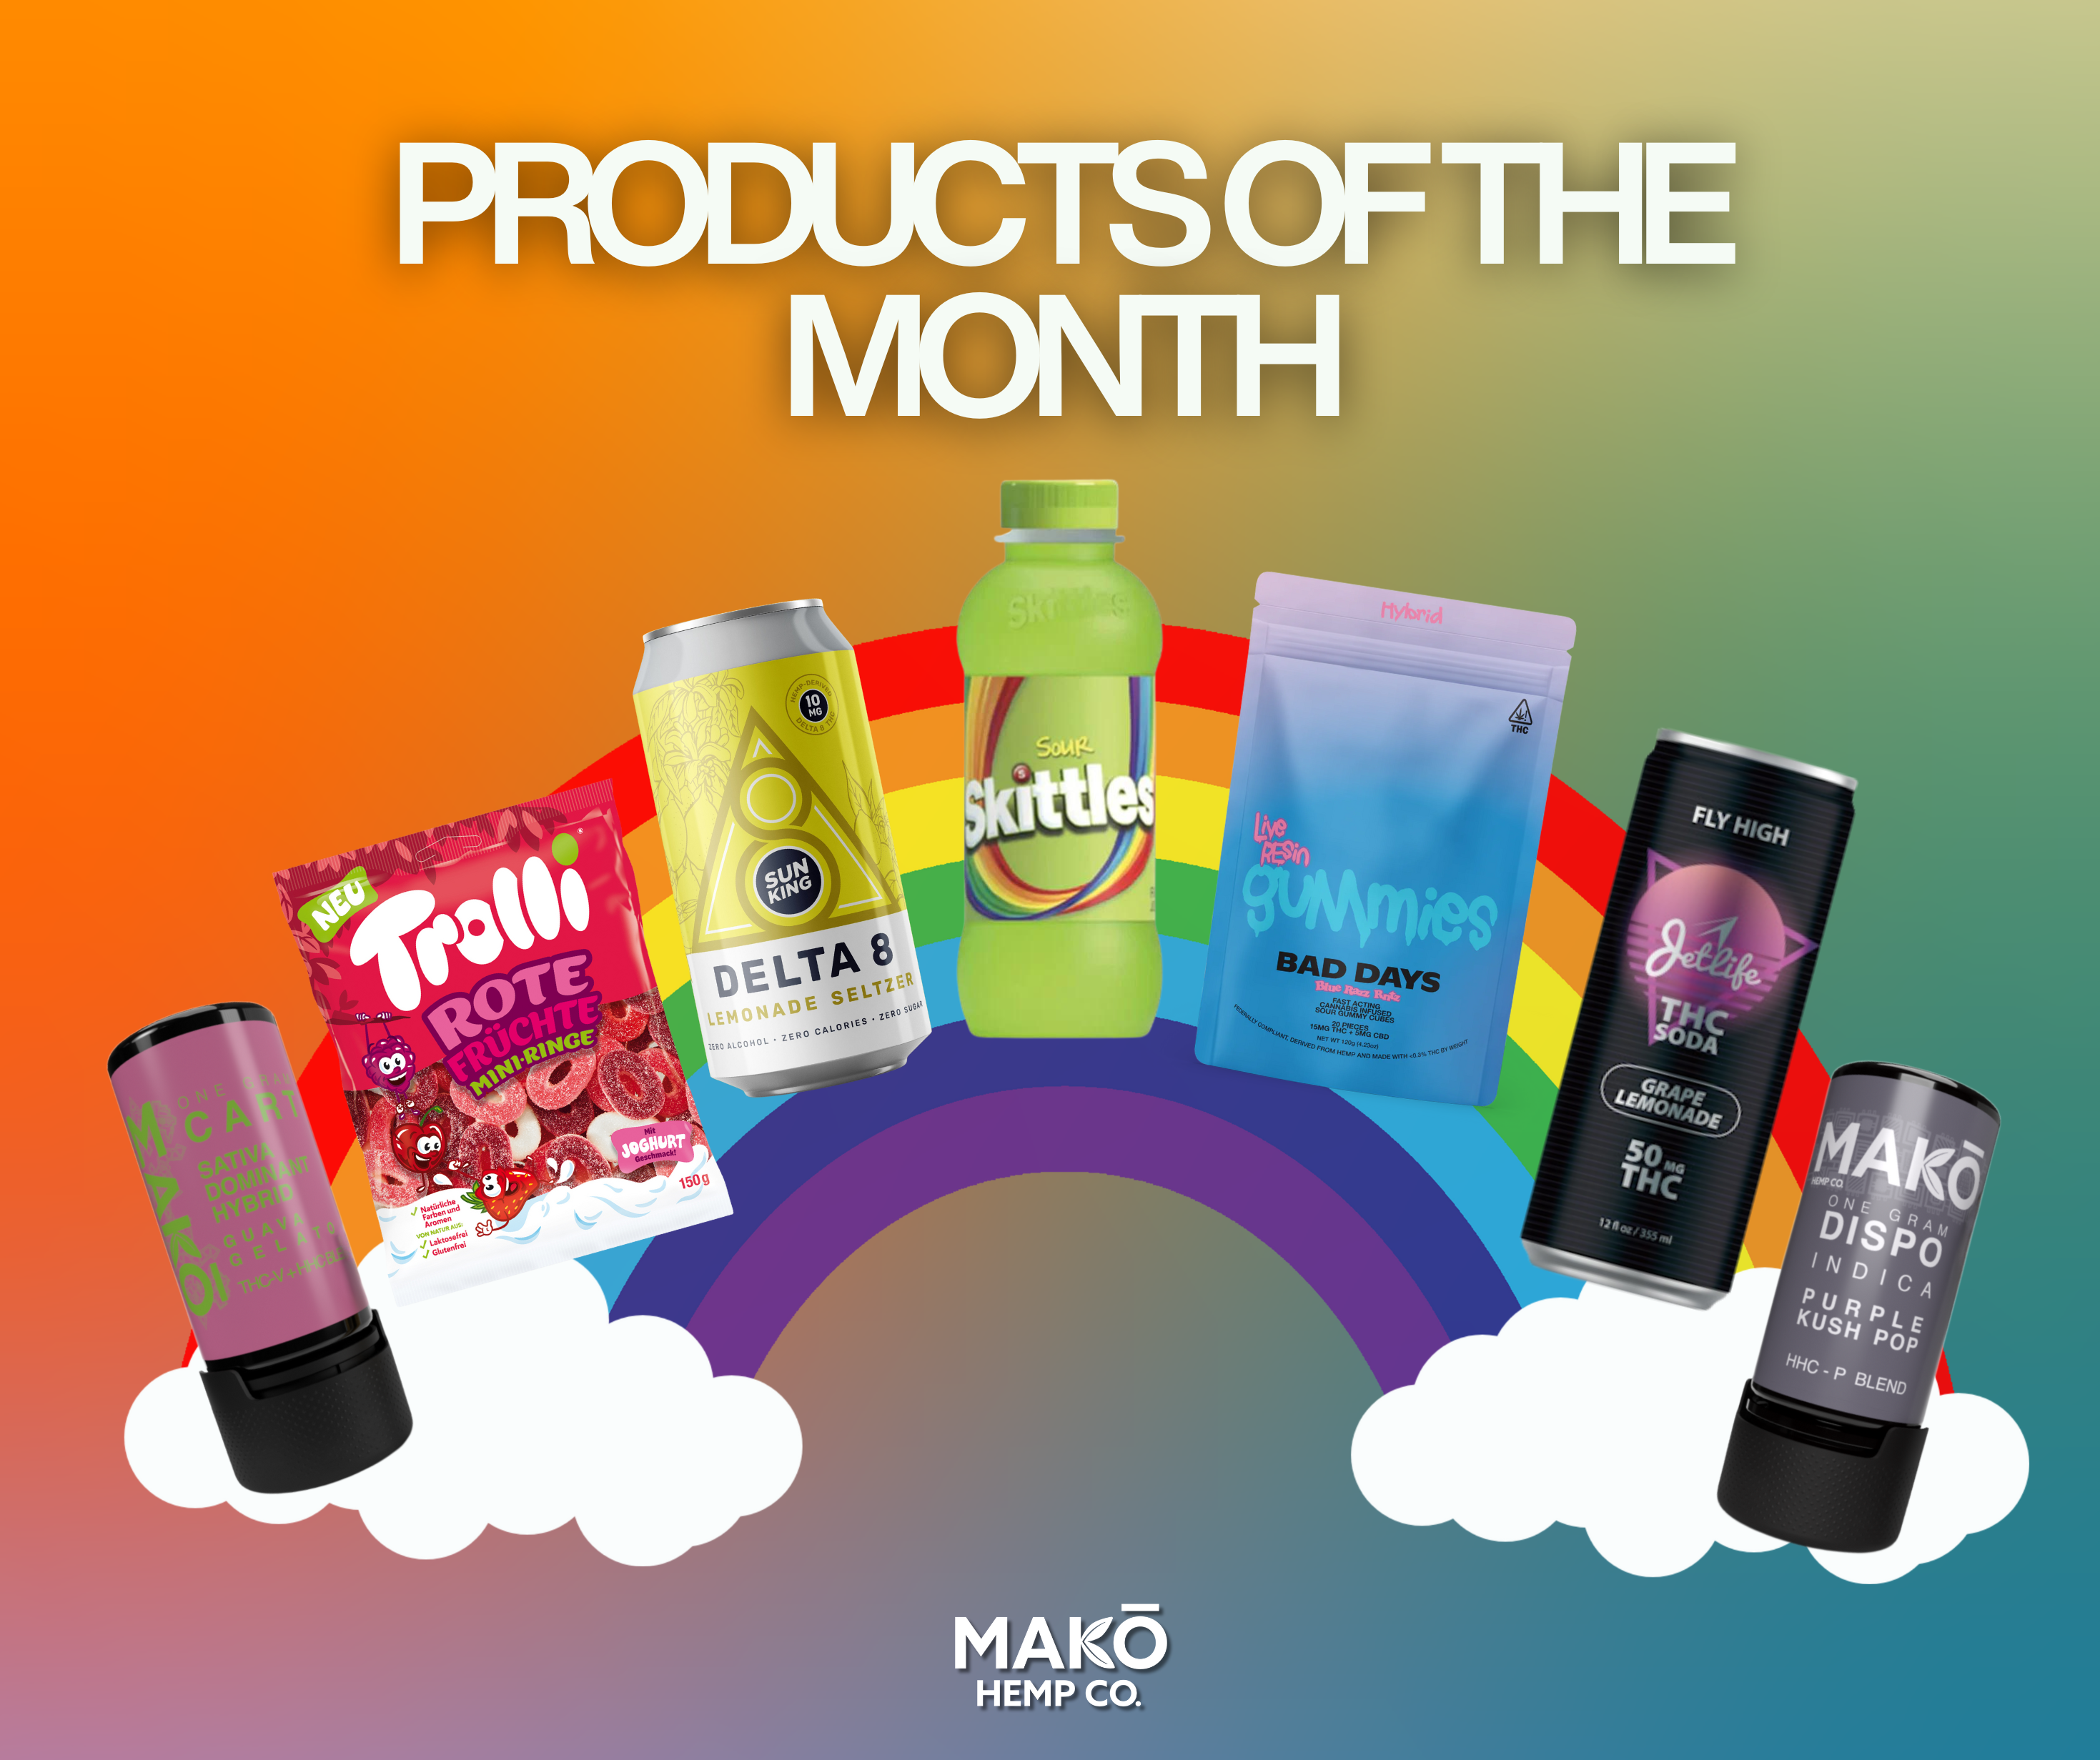 Colorful banner showcasing Mako Hemp Co.'s Products of the Month for June. Featured products include Mako Cart - Guava Gelato, Trolli Rote Fruchtchen Minis, Sun King Delta 8 Lemonade Seltzer, Sour Skittles drink, Bad Days Live Resin Gummies, Crescent Canna JetLife THC Soda - Grape Lemonade, and Mako Disposable Vape and Cart - Purple Kush Pop and Guava Gelato. The products are displayed against a vibrant background with a rainbow and clouds, with the Mako Hemp Co. logo at the bottom.